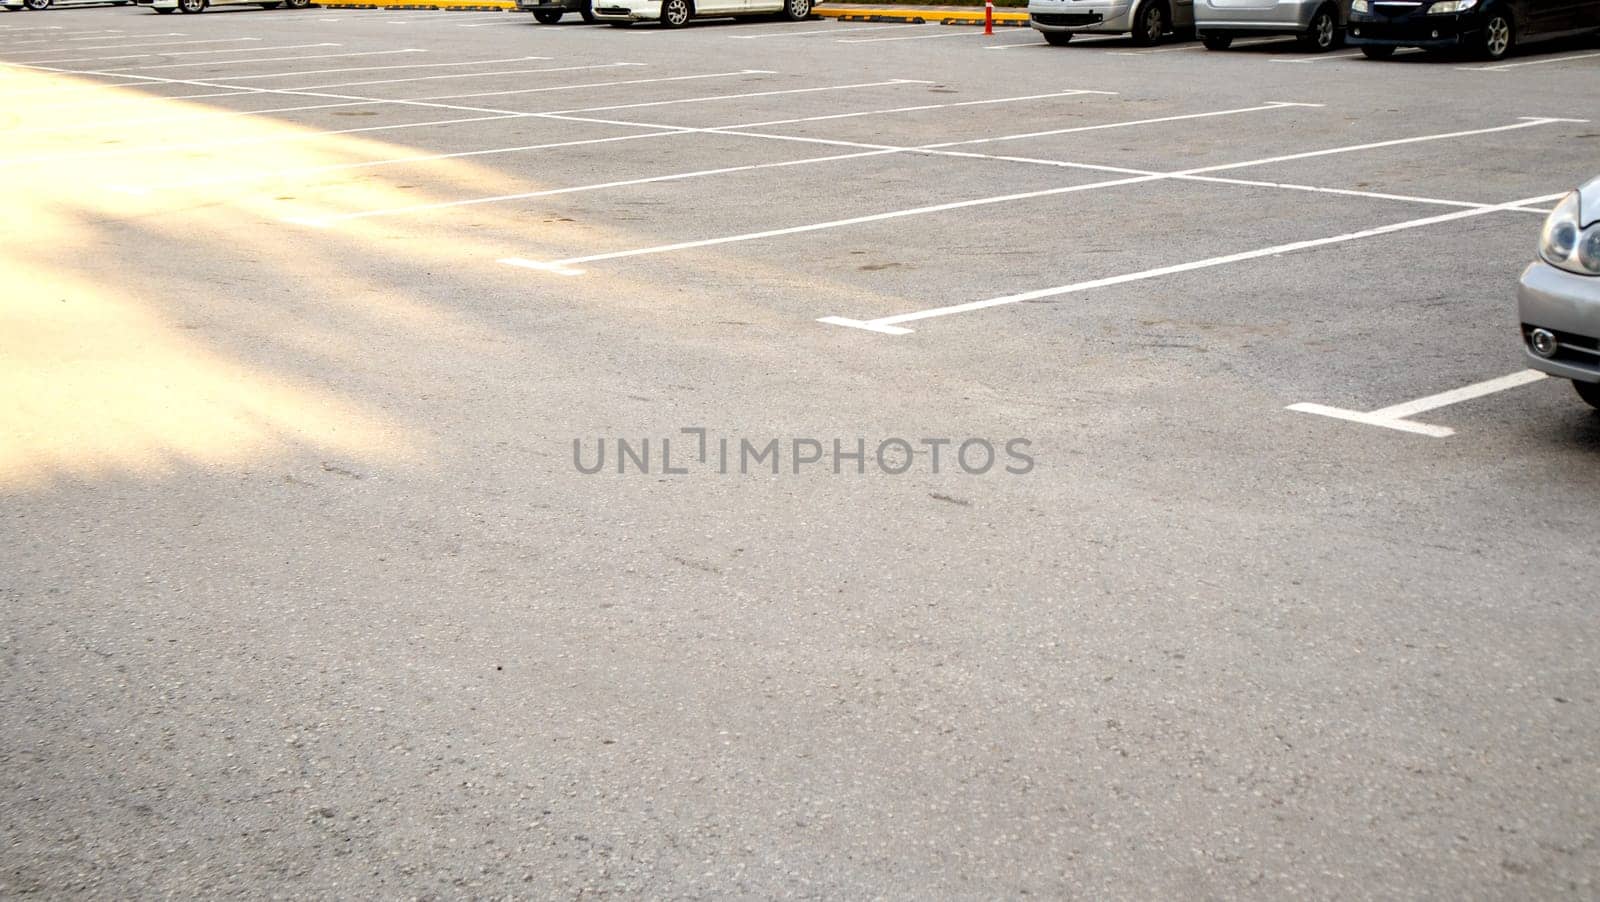 Car parking with white markings on the asphalt, close-up.